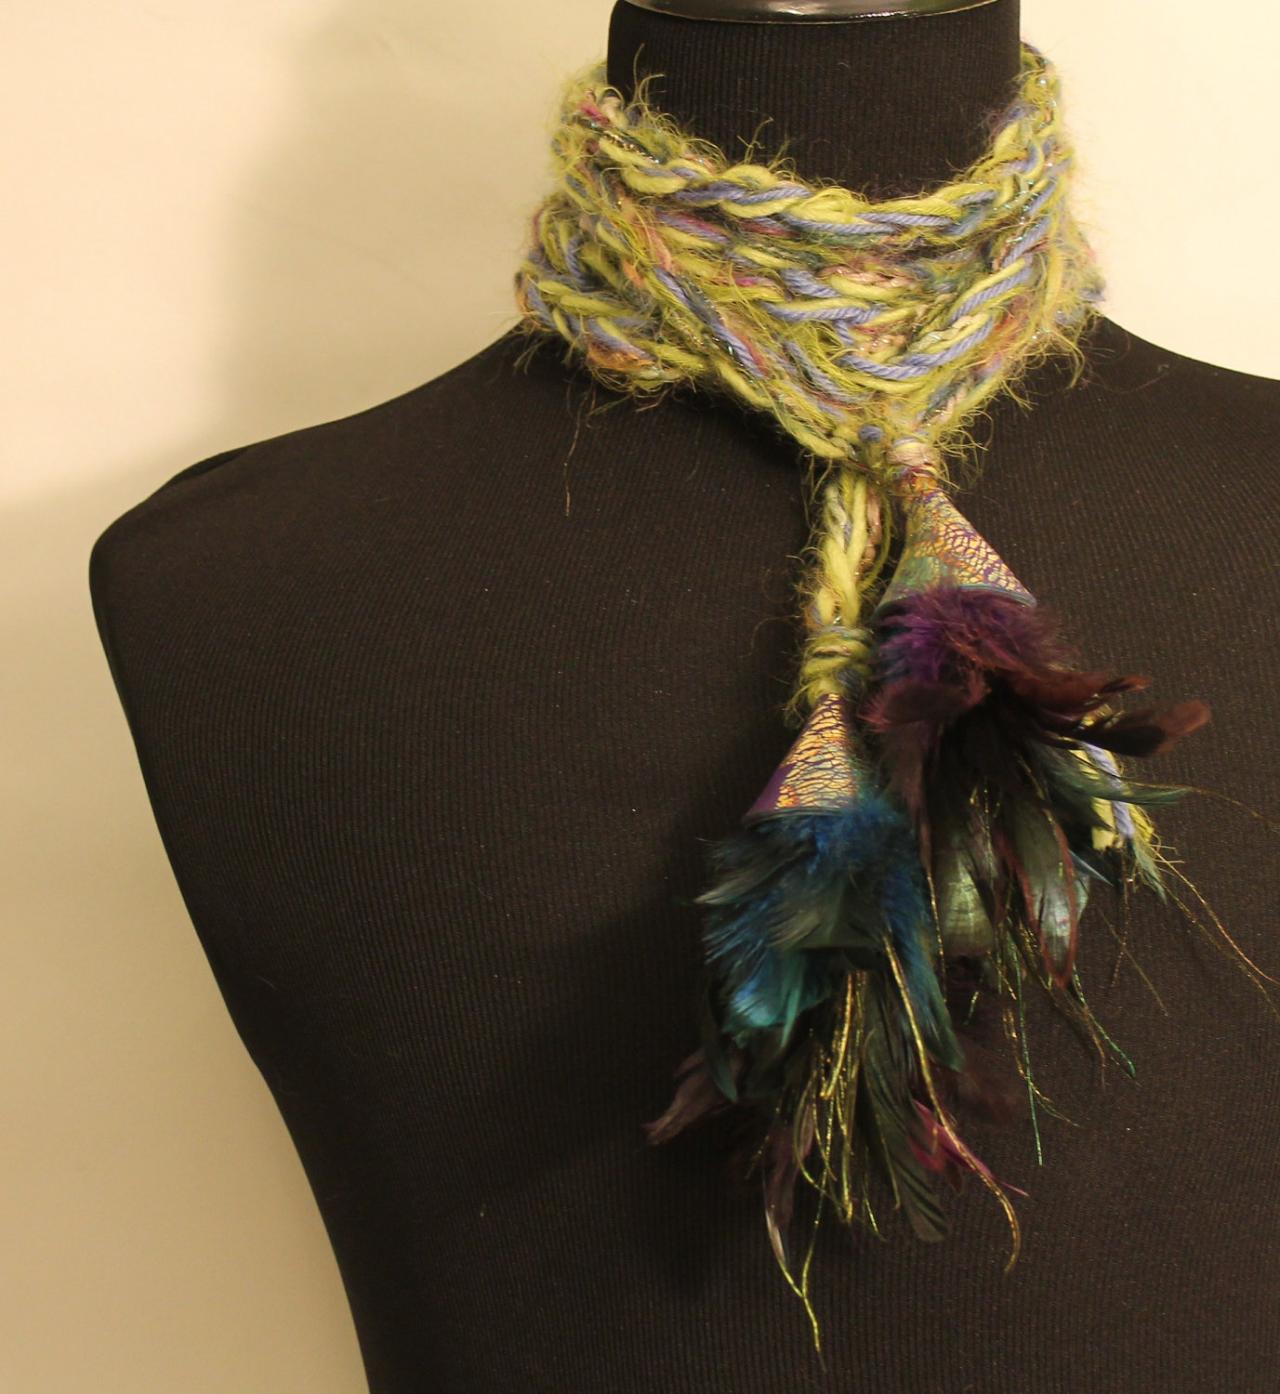 Womens Long Scarf Neck Wrap with Tassels and Jeweled Caps and Feathers, 126 inches Long